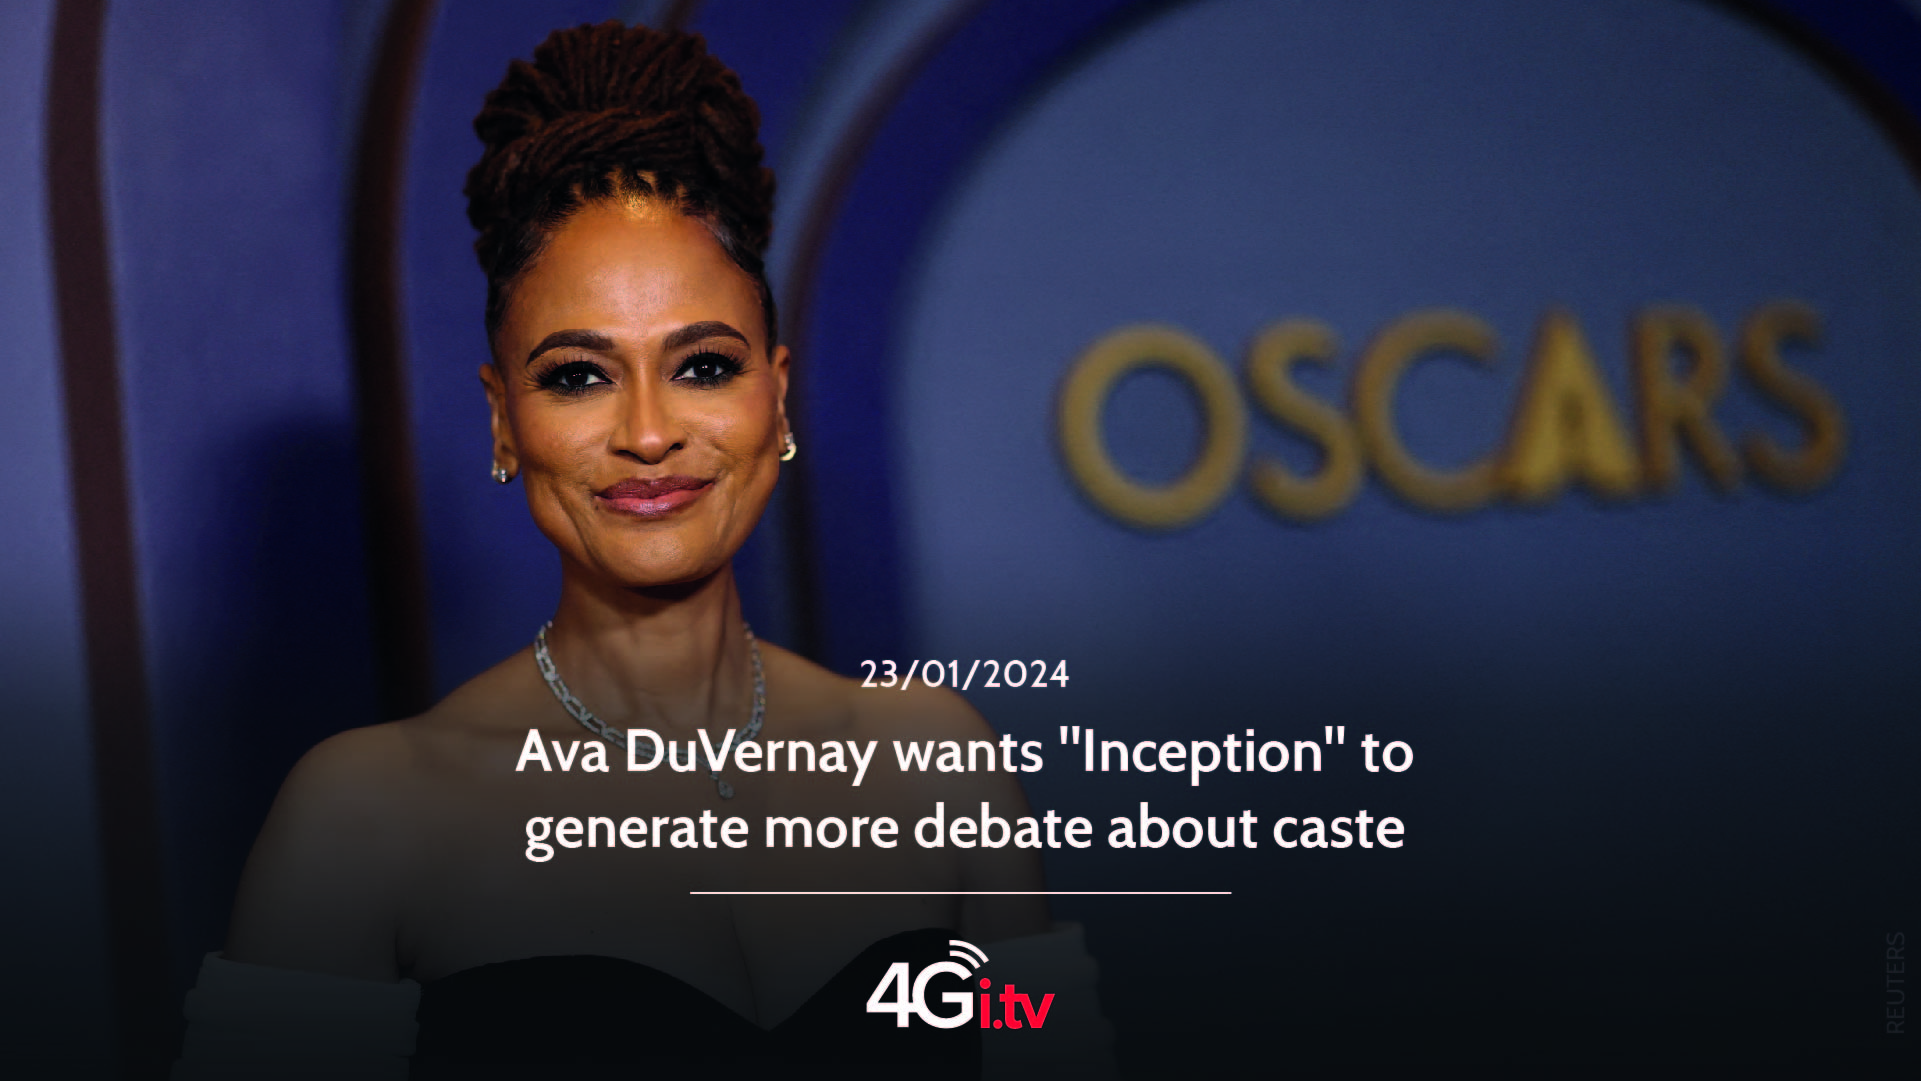 Подробнее о статье Ava DuVernay wants “Inception” to generate more debate about caste